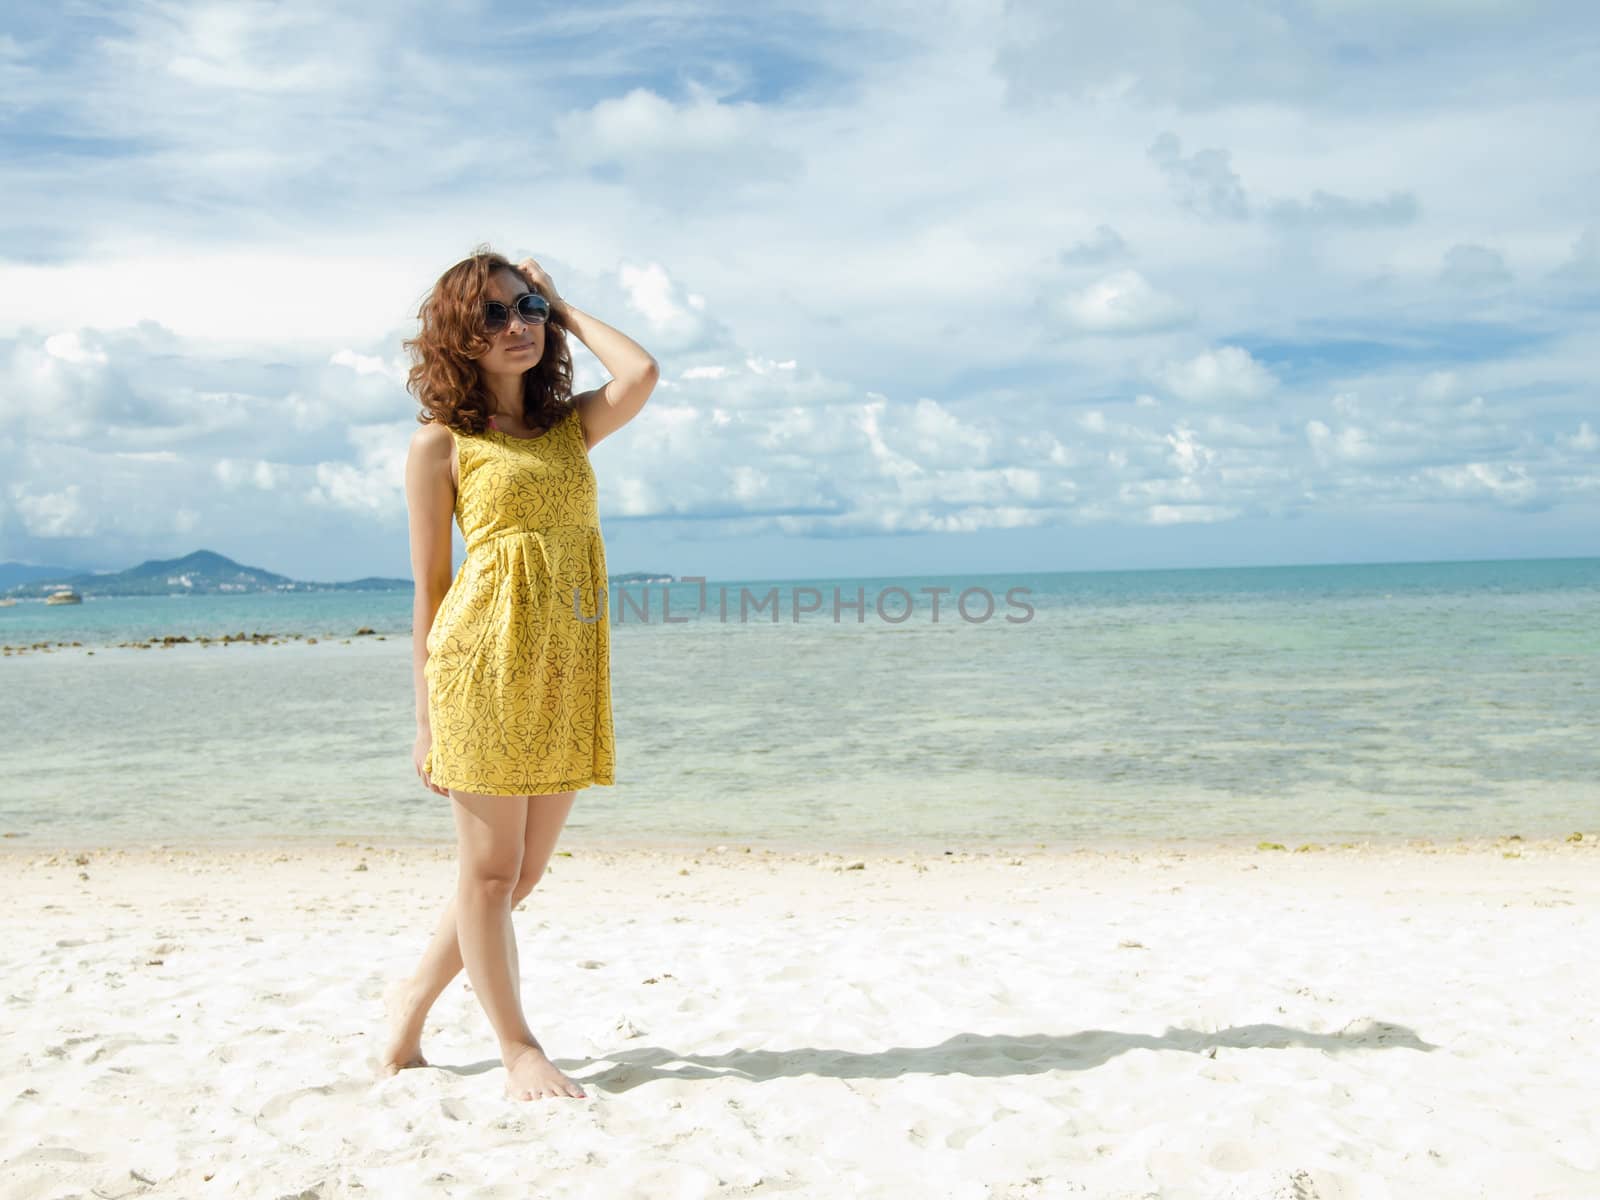 Asian Women on the Beach with vibrant yellow dress by jakgree